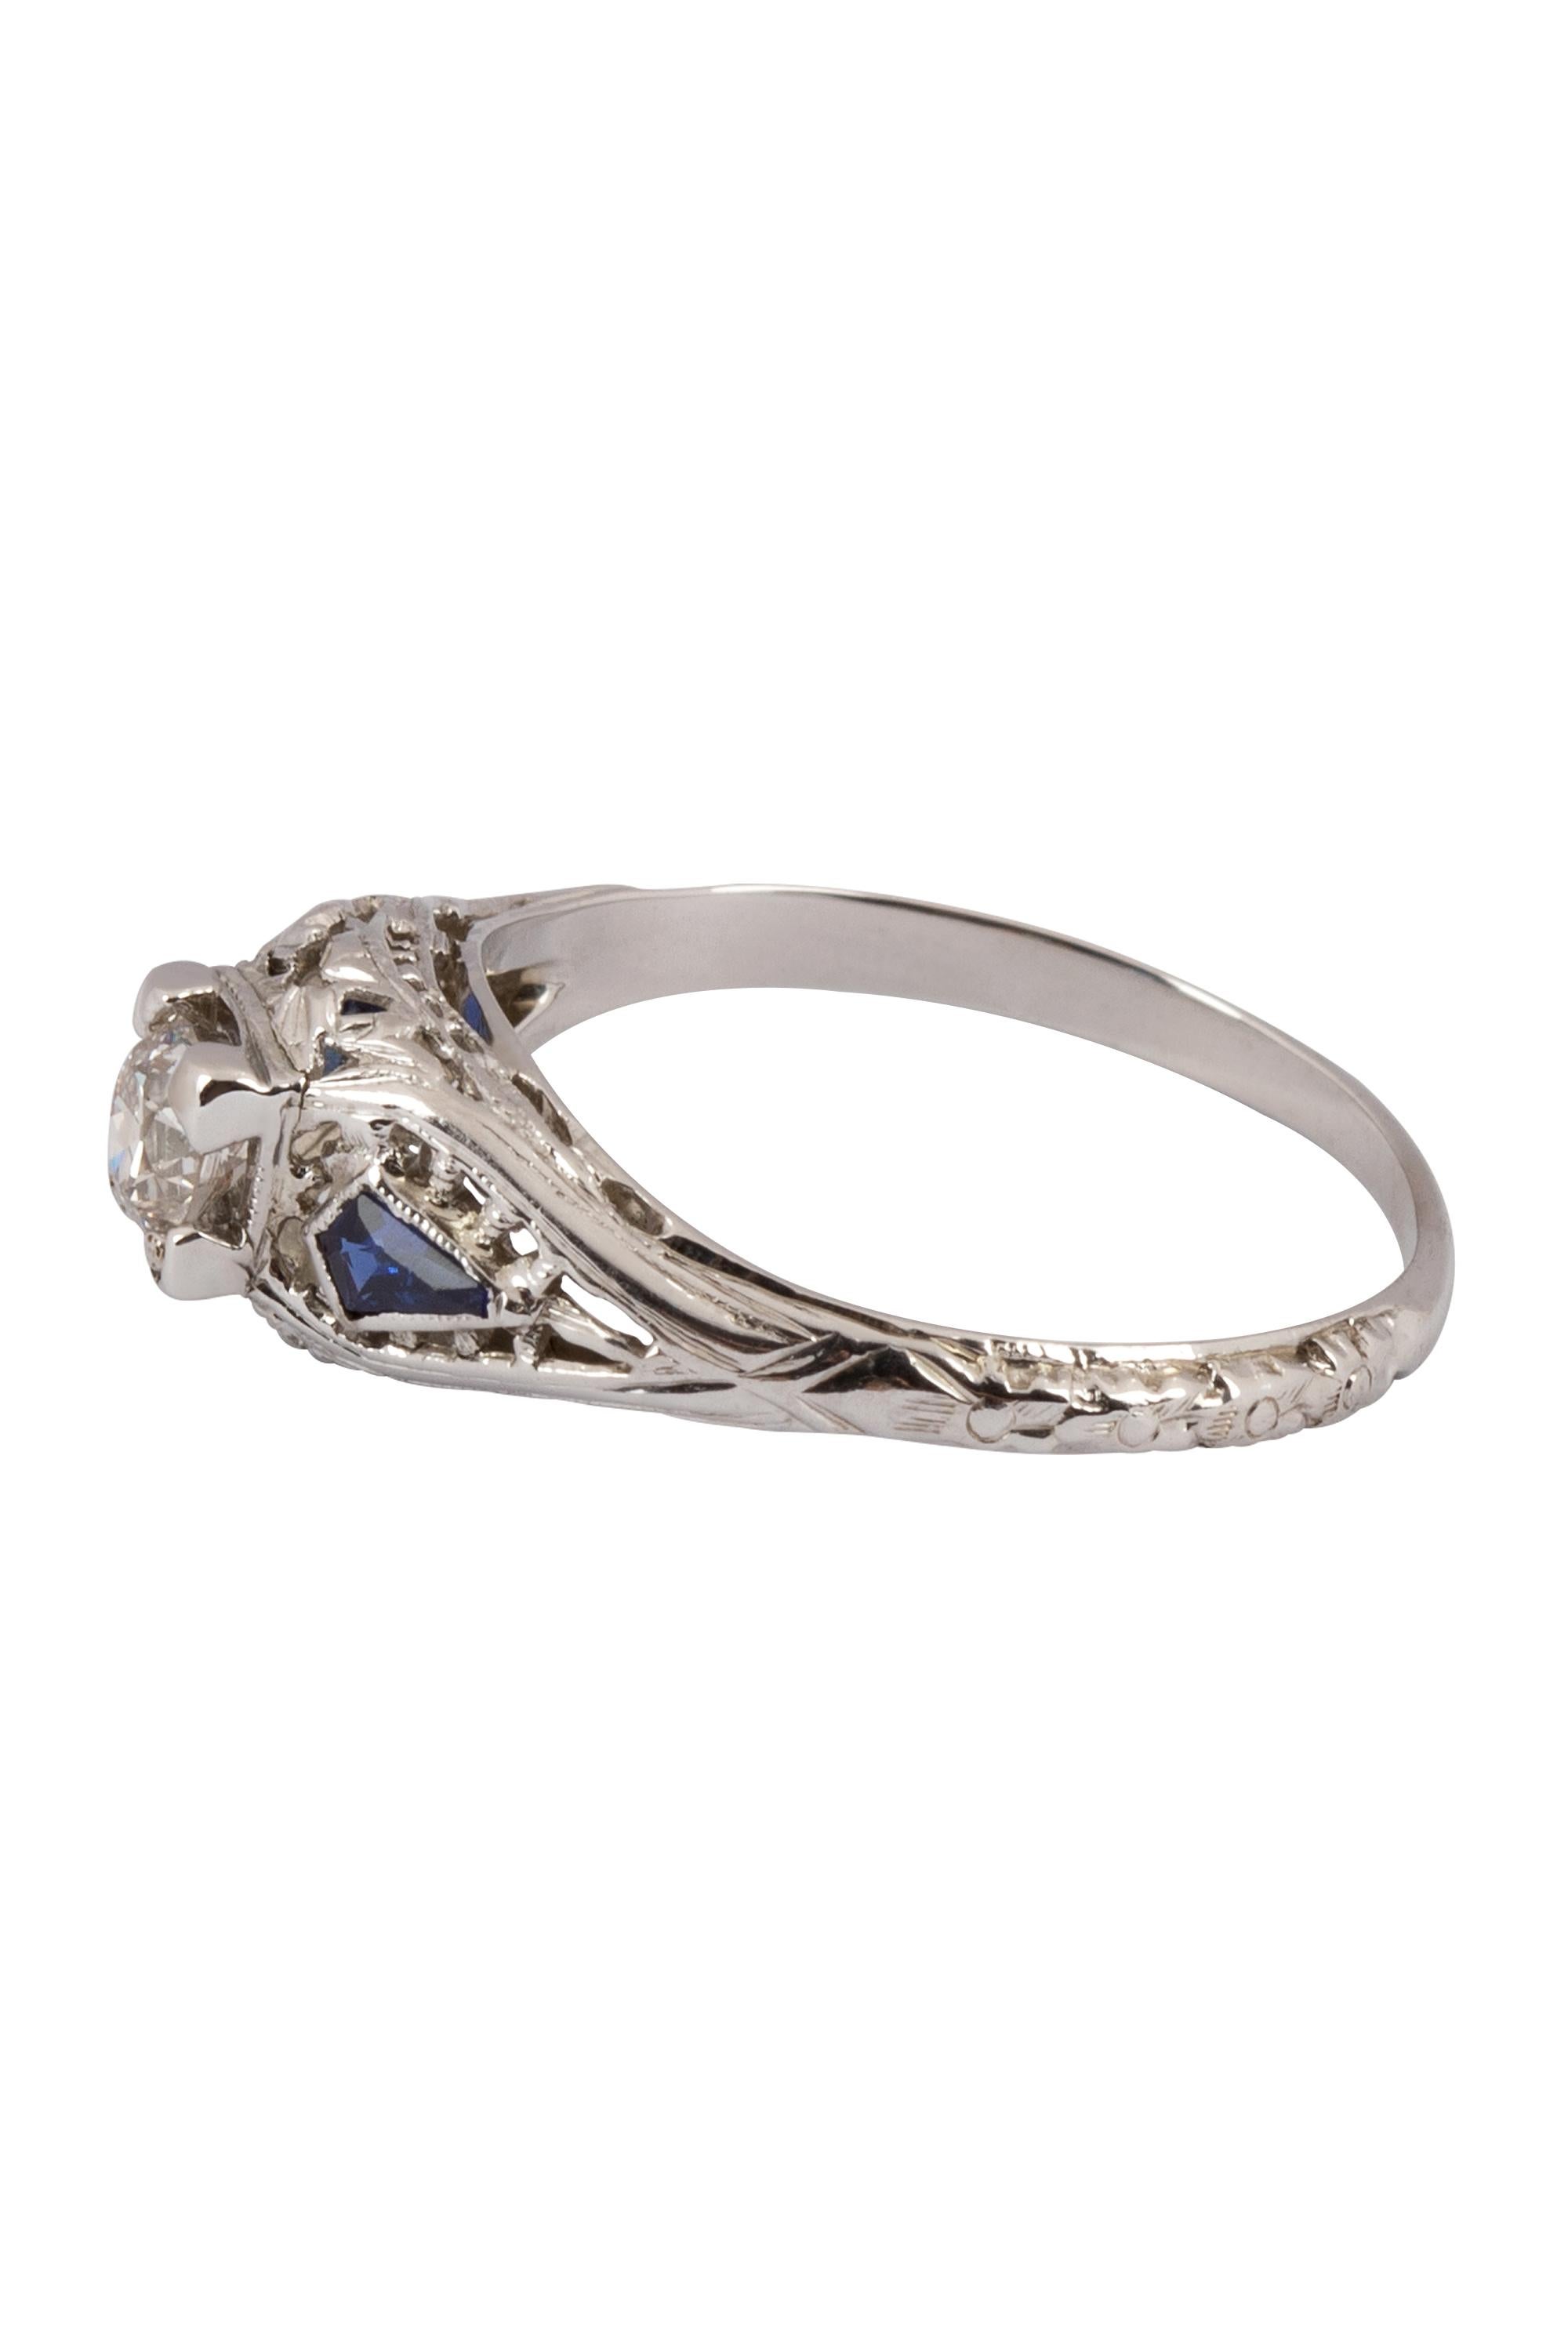 Old European Cut Art Deco Diamond and Sapphire Ring 18K White Gold For Sale